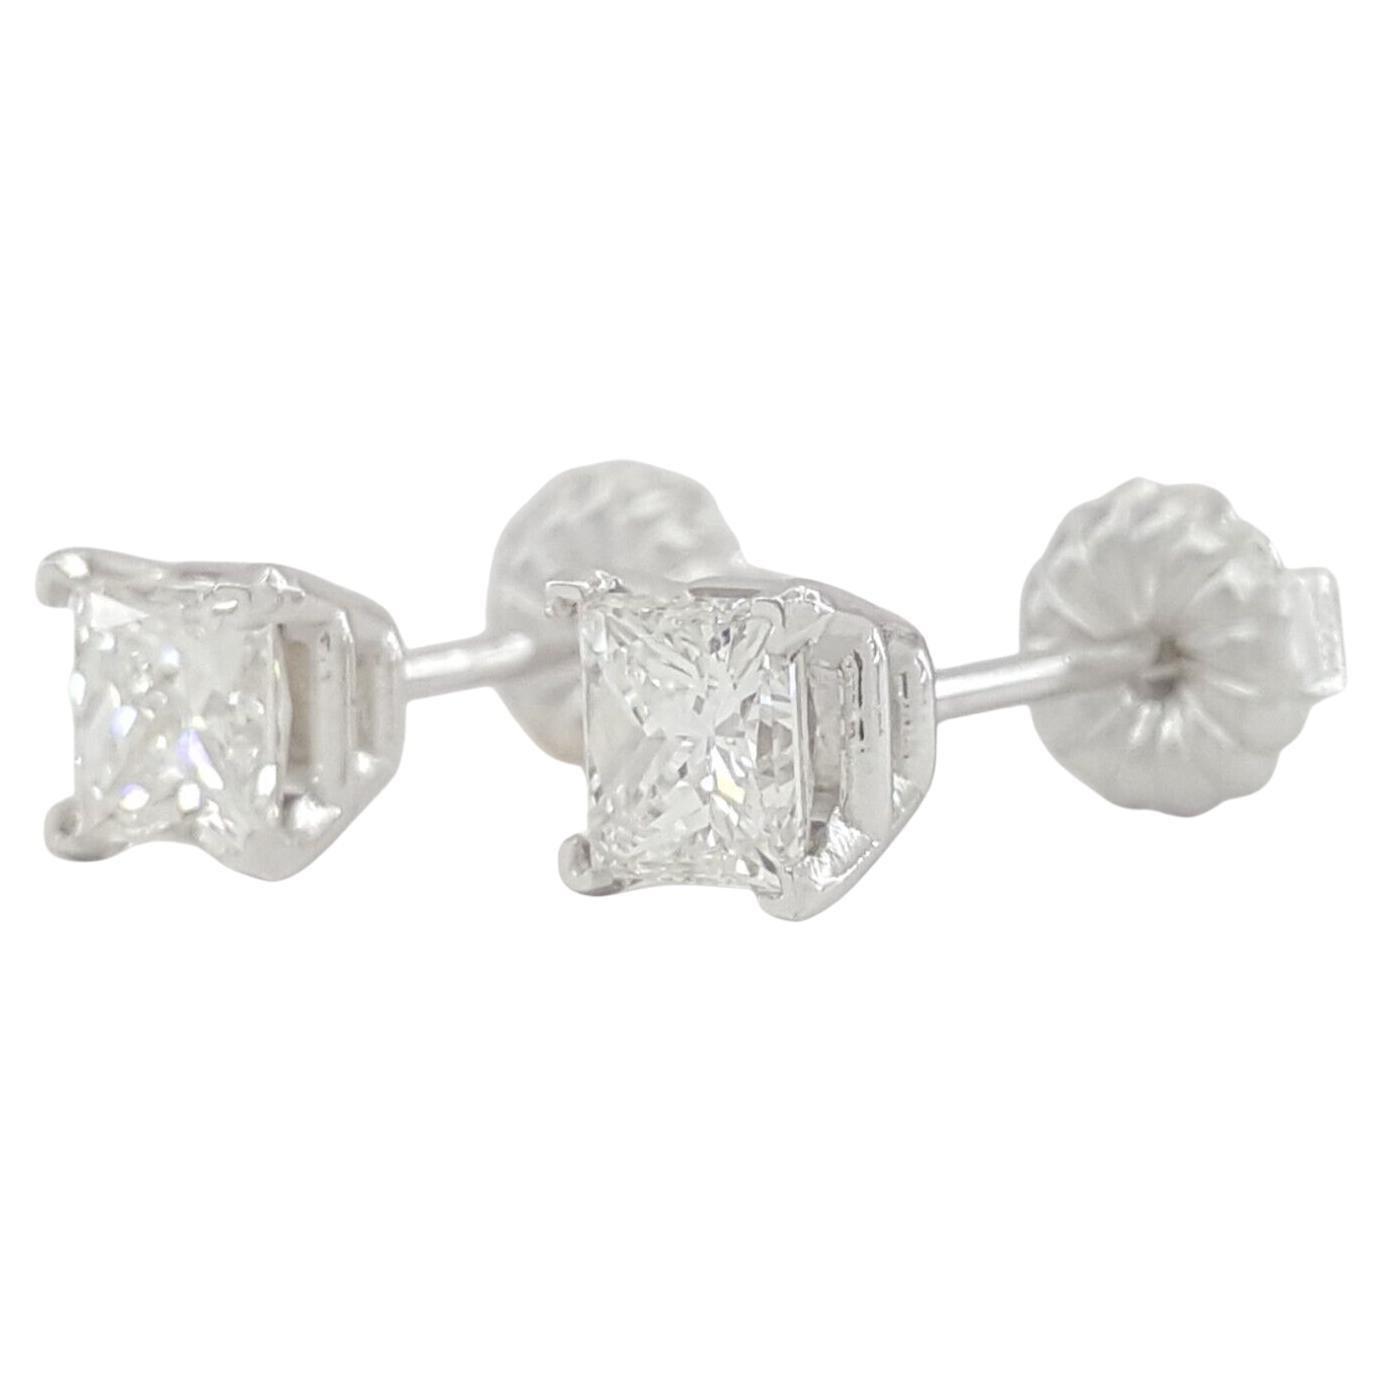 Adorn yourself with sophistication and grace with these GIA Certified Princess Brilliant Cut Diamond 18K White Gold Stud Earrings. Crafted to perfection, these earrings exude timeless elegance and understated luxury.
Each earring features a dazzling